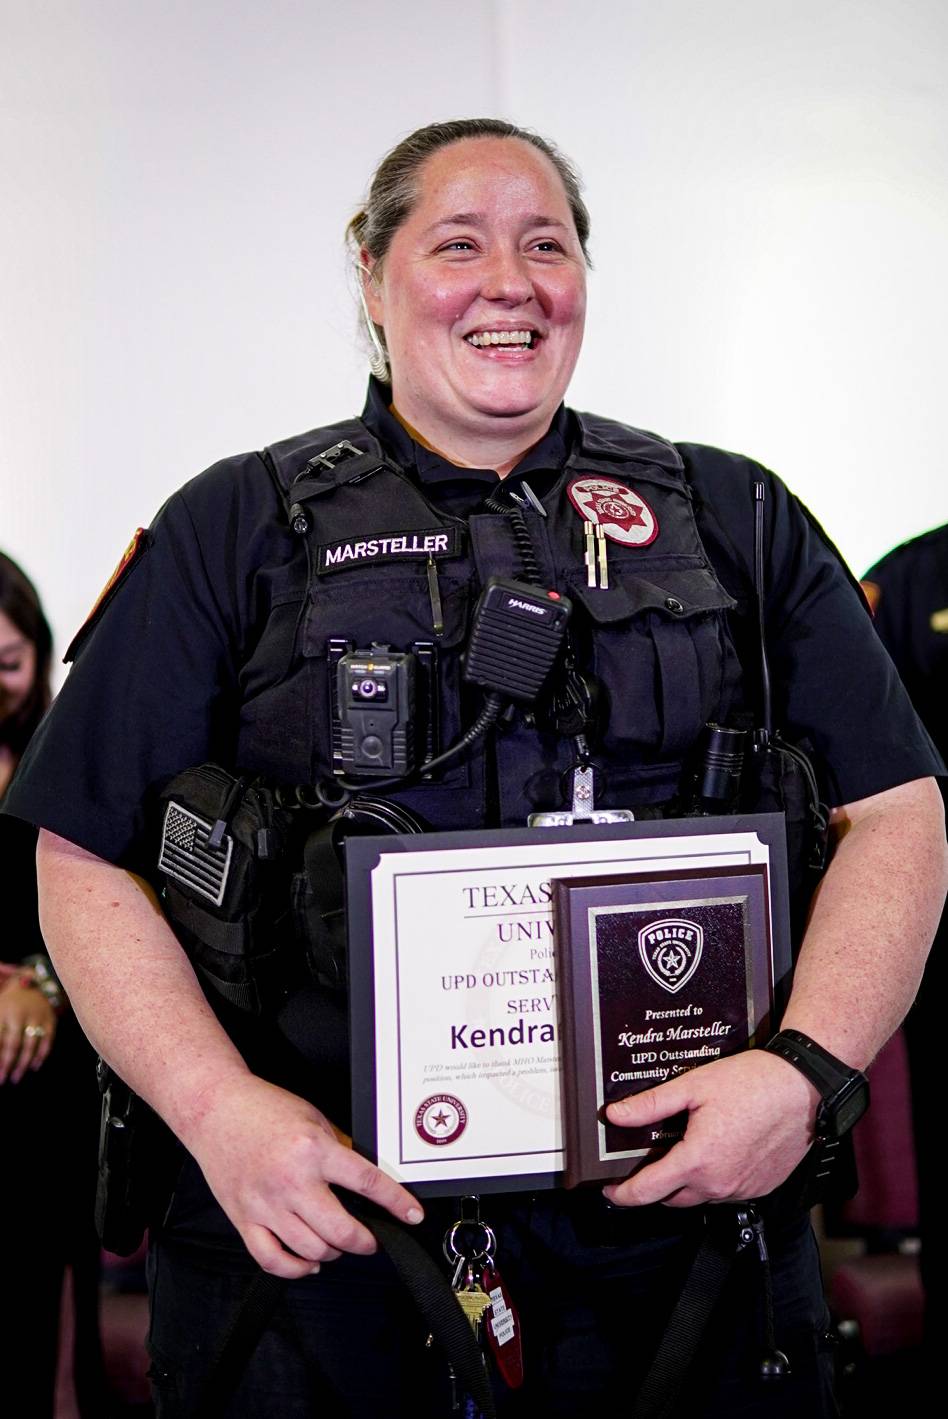 woman smiling and holding award